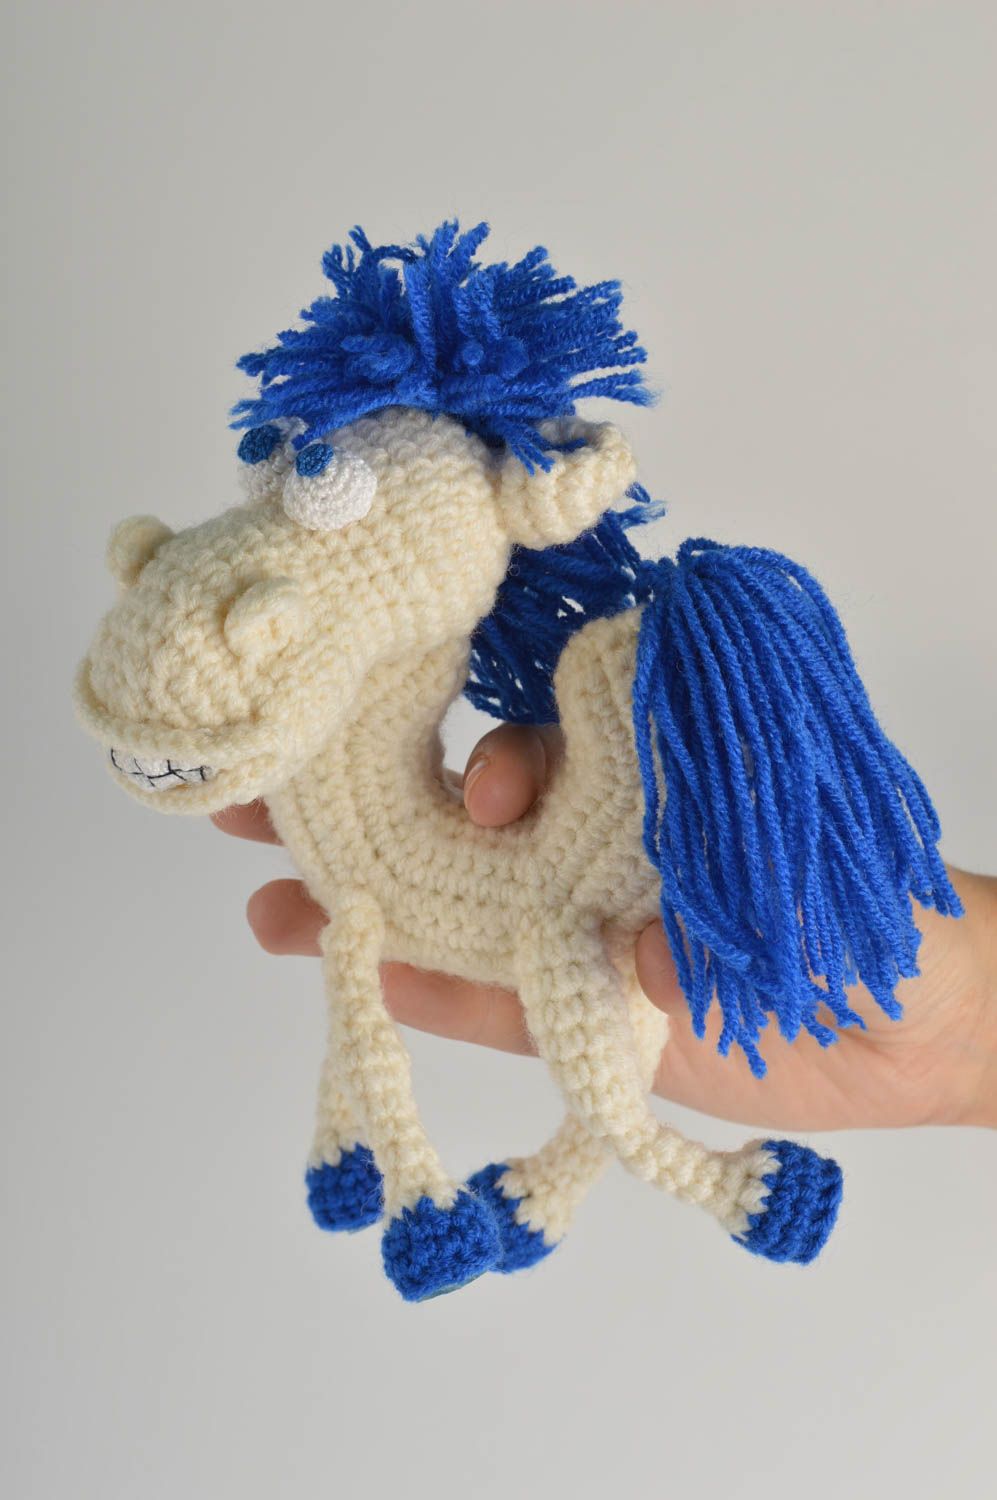 Beautiful handmade crochet toy soft childrens toys best toys for kids gift ideas photo 2